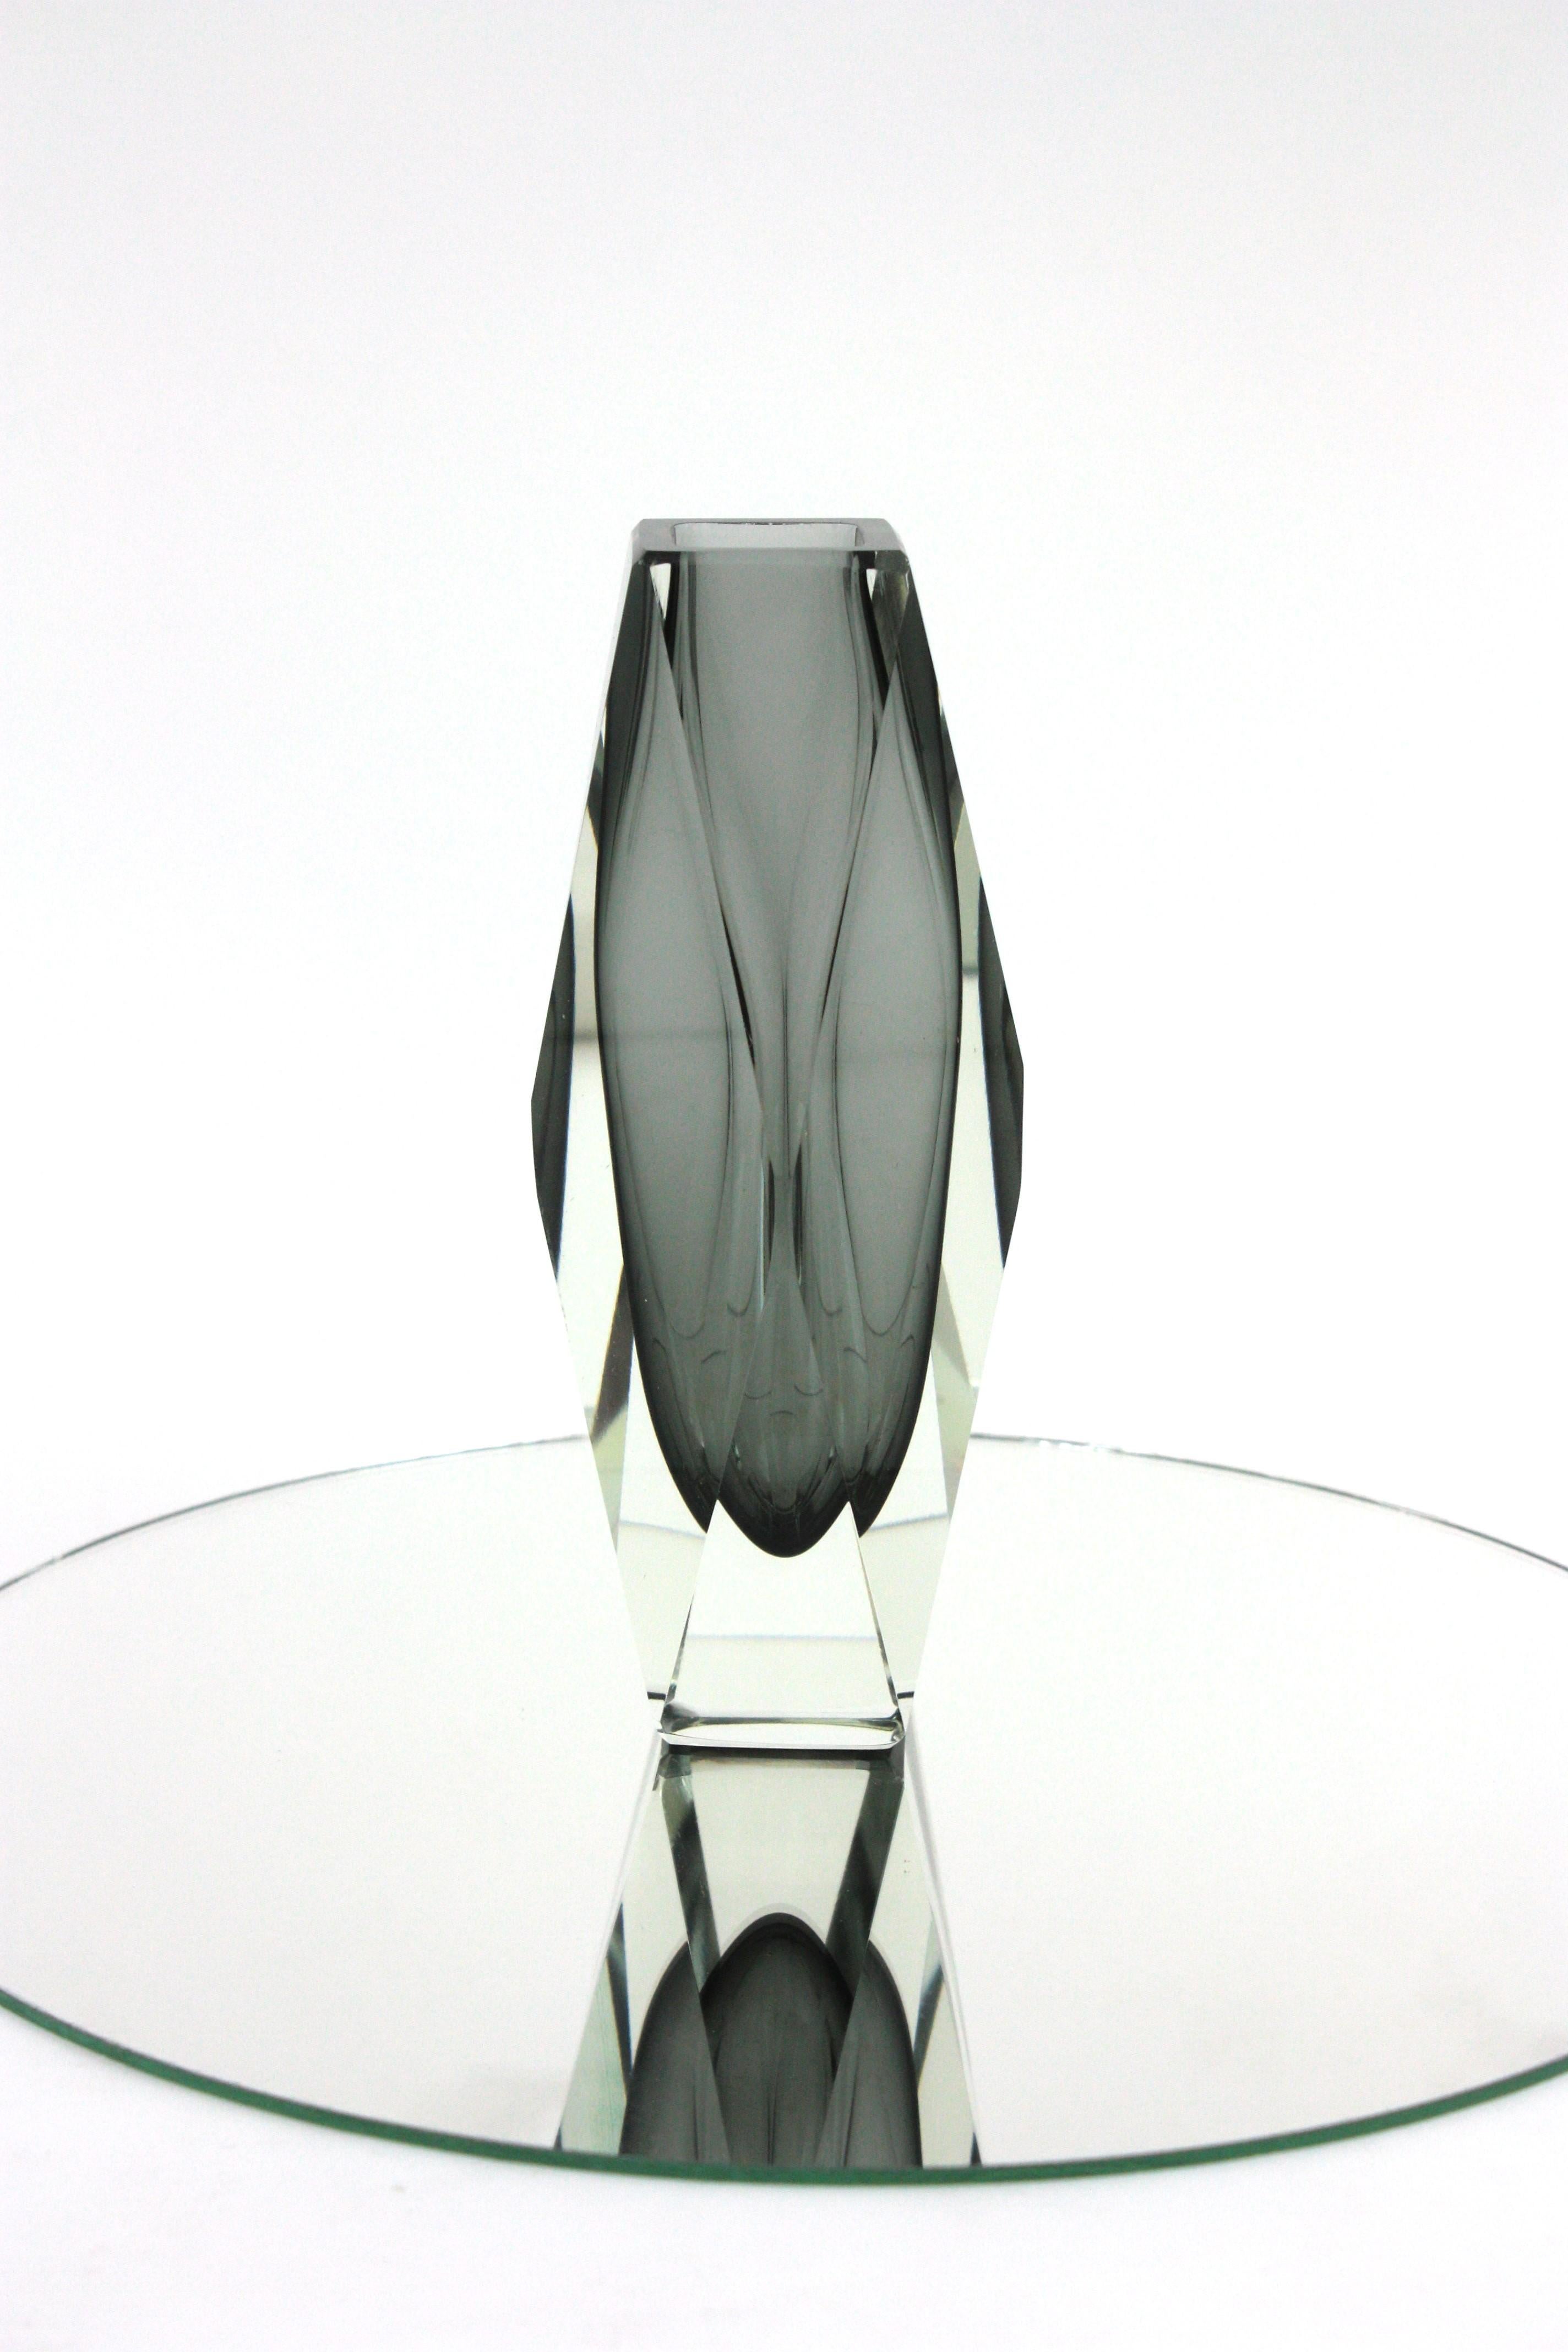 Italian Mandruzzato Murano Sommerso Smoked Grey Clear Faceted Art Glass Vase For Sale